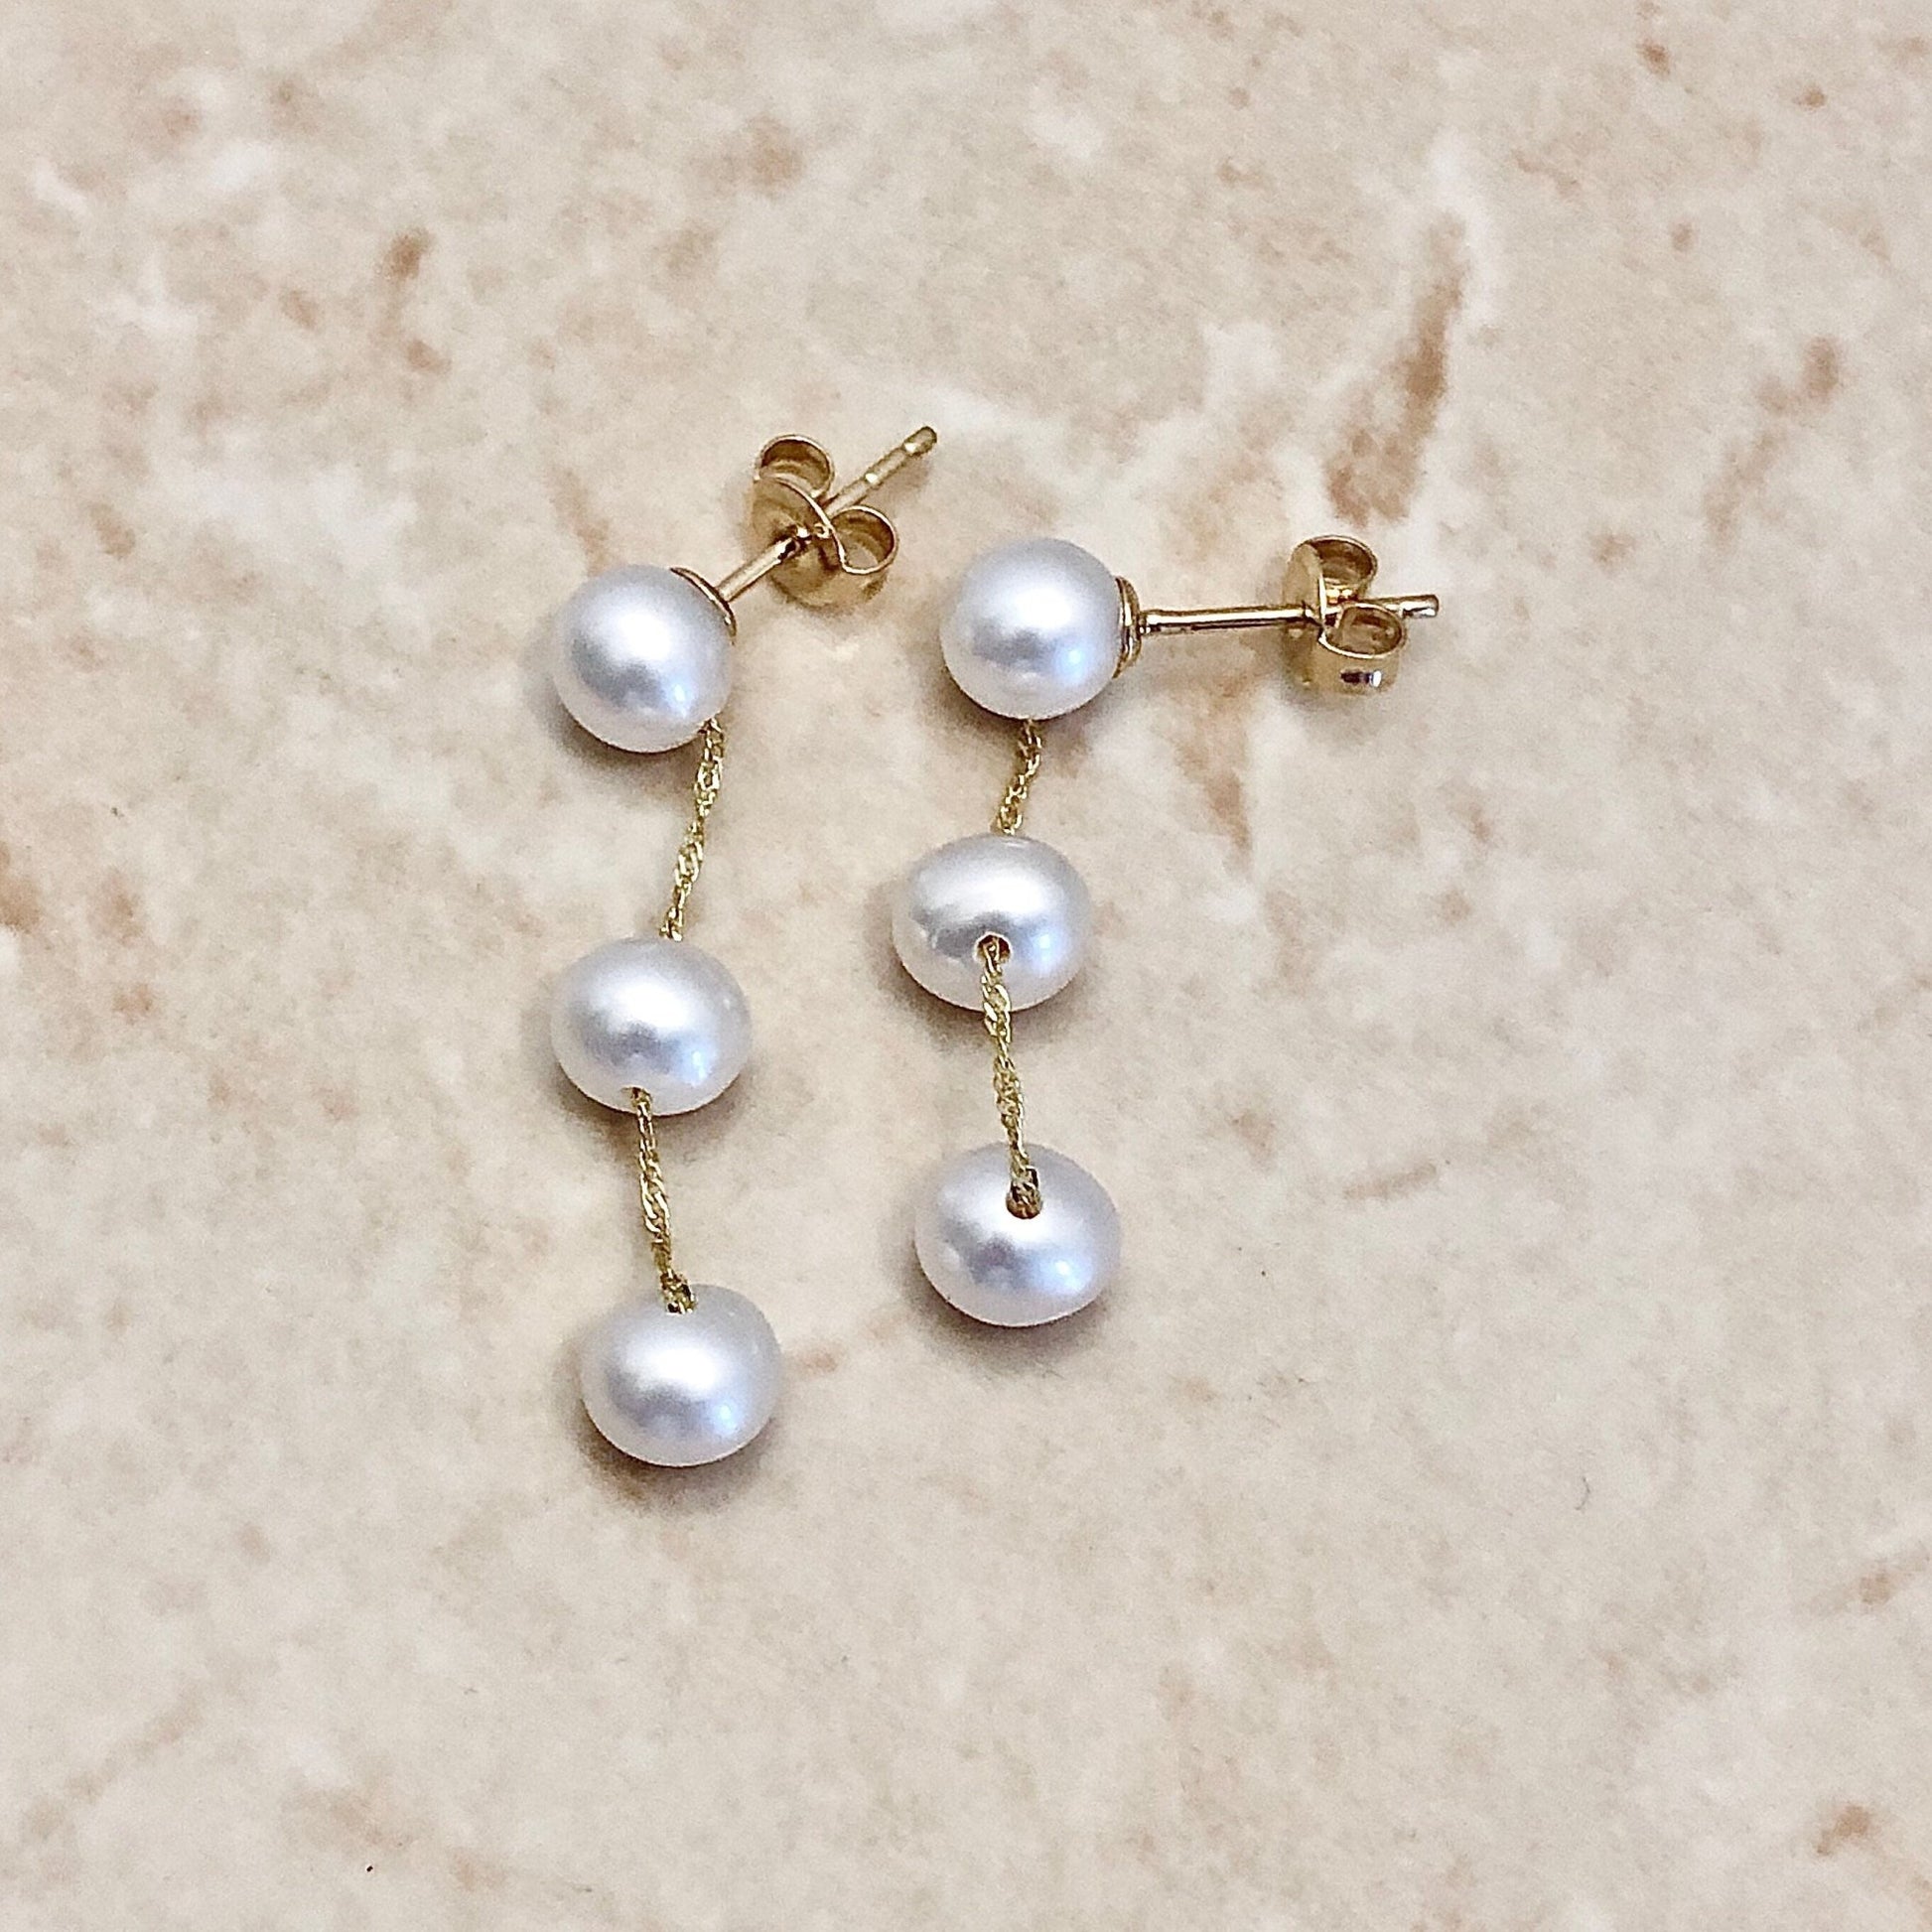 14K Tin Cup Pearl Drop Earrings - Yellow Gold Genuine Pearl Earrings - Birthday Gift - June Birthstone - Best Gift For Her - Jewelry Sale